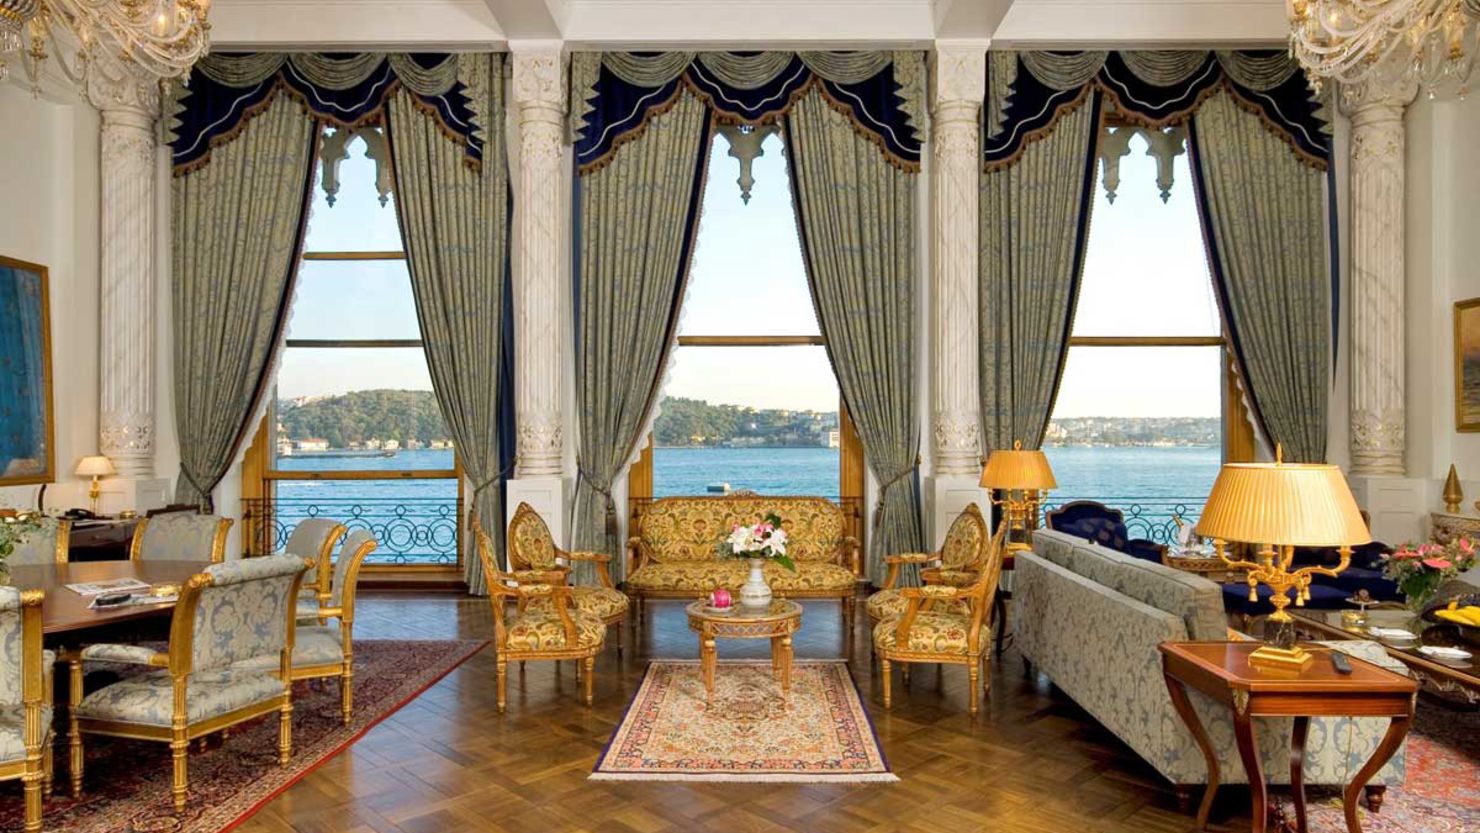 The Sultan's Suite at Ciragan Palace comes with private butler service, opulent chandeliers, period furniture and fine art.